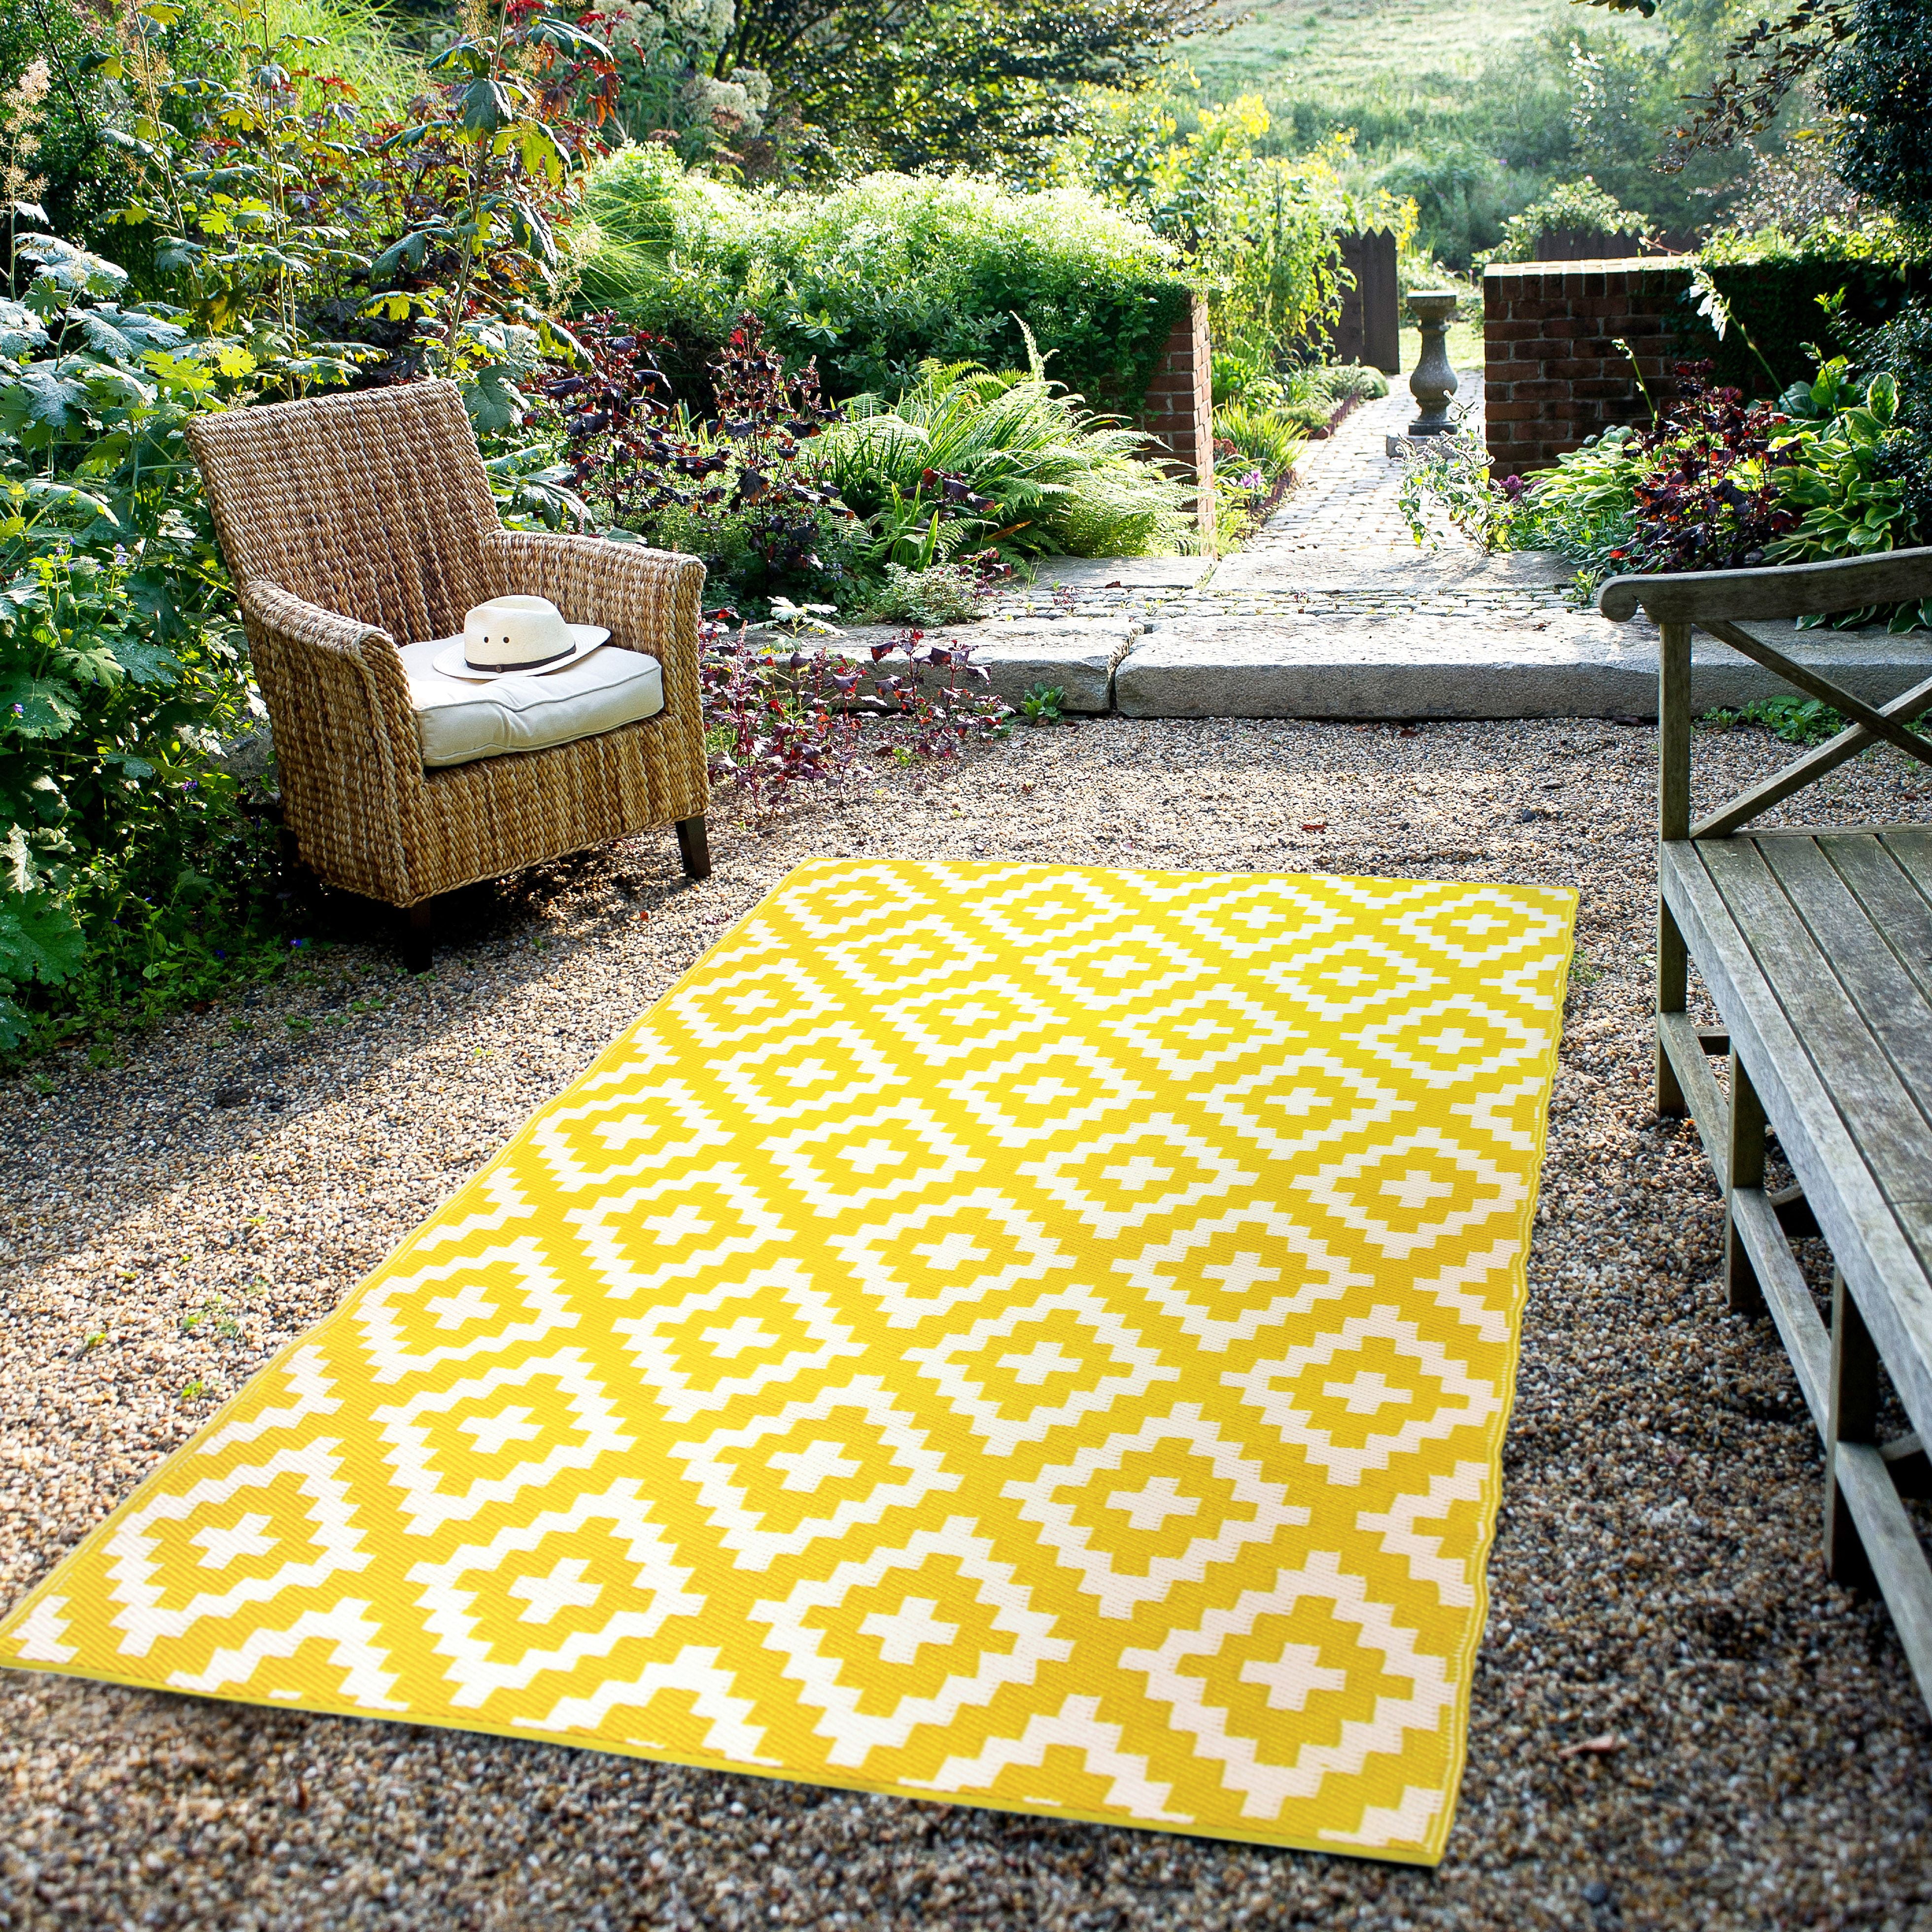 Fab Habitat Outdoor Rug - Waterproof, Fade Resistant, Crease-Free - Premium  Recycled Plastic - Striped - Large Patio, Deck, Sunroom, Camping, RV 